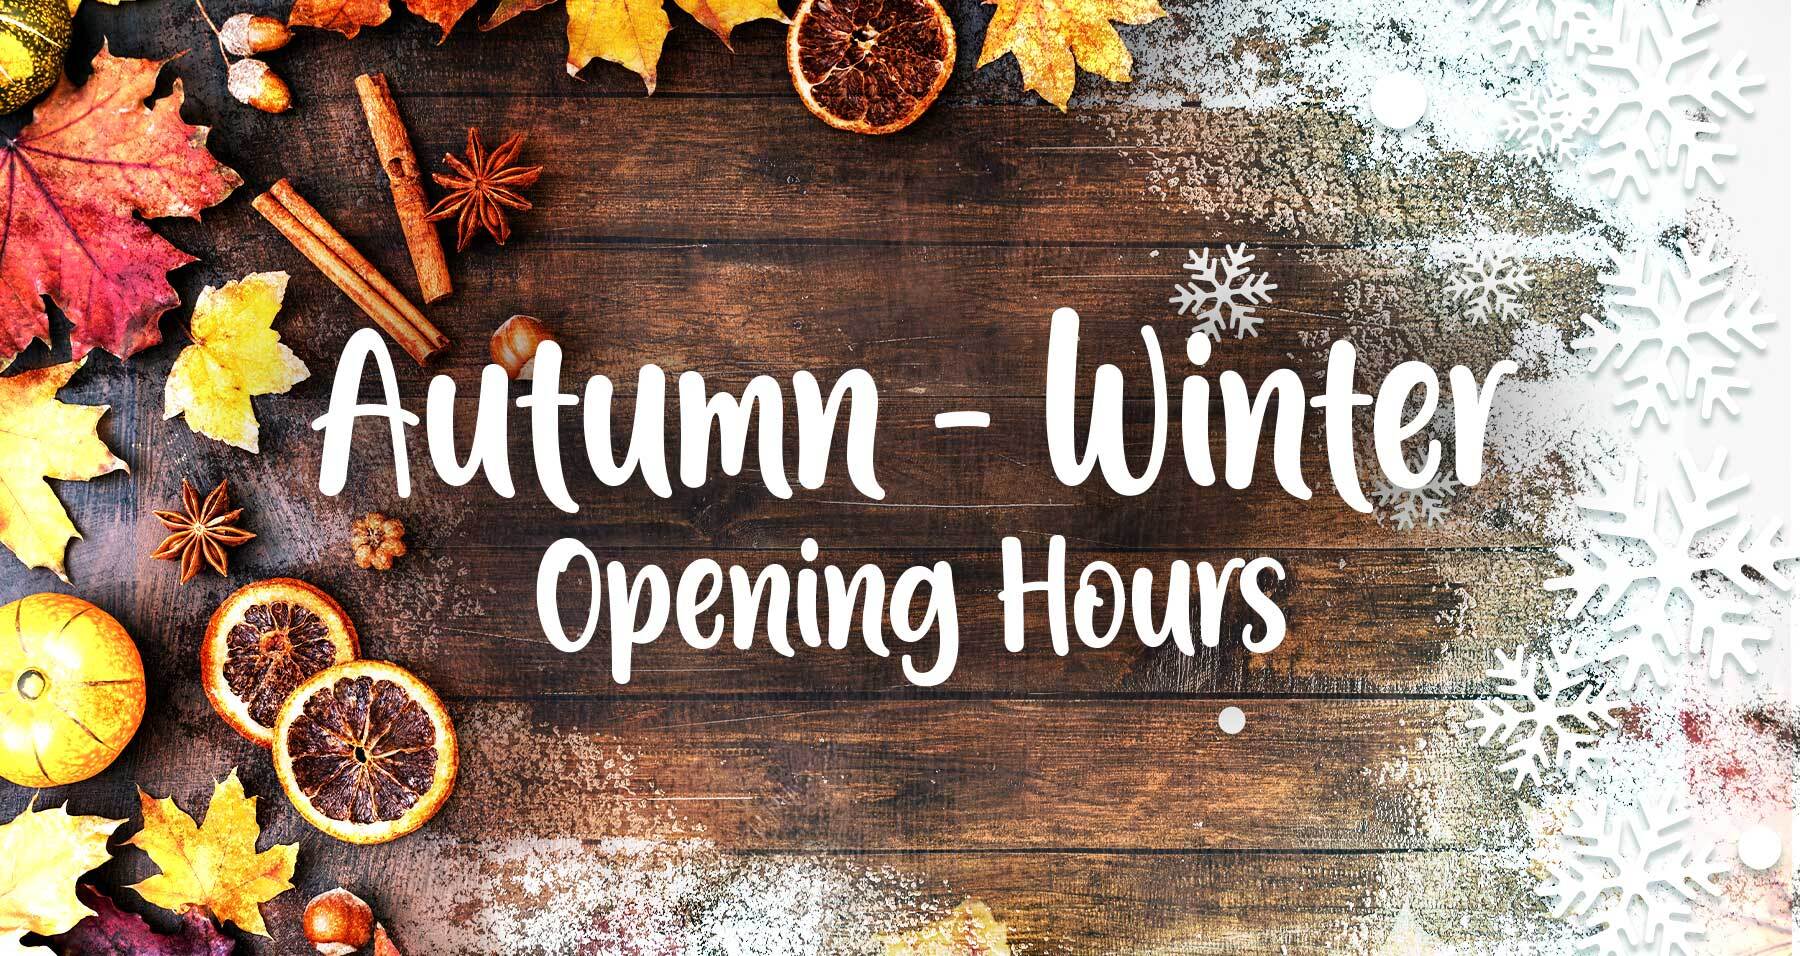 Autumn-Winter Opening Hours